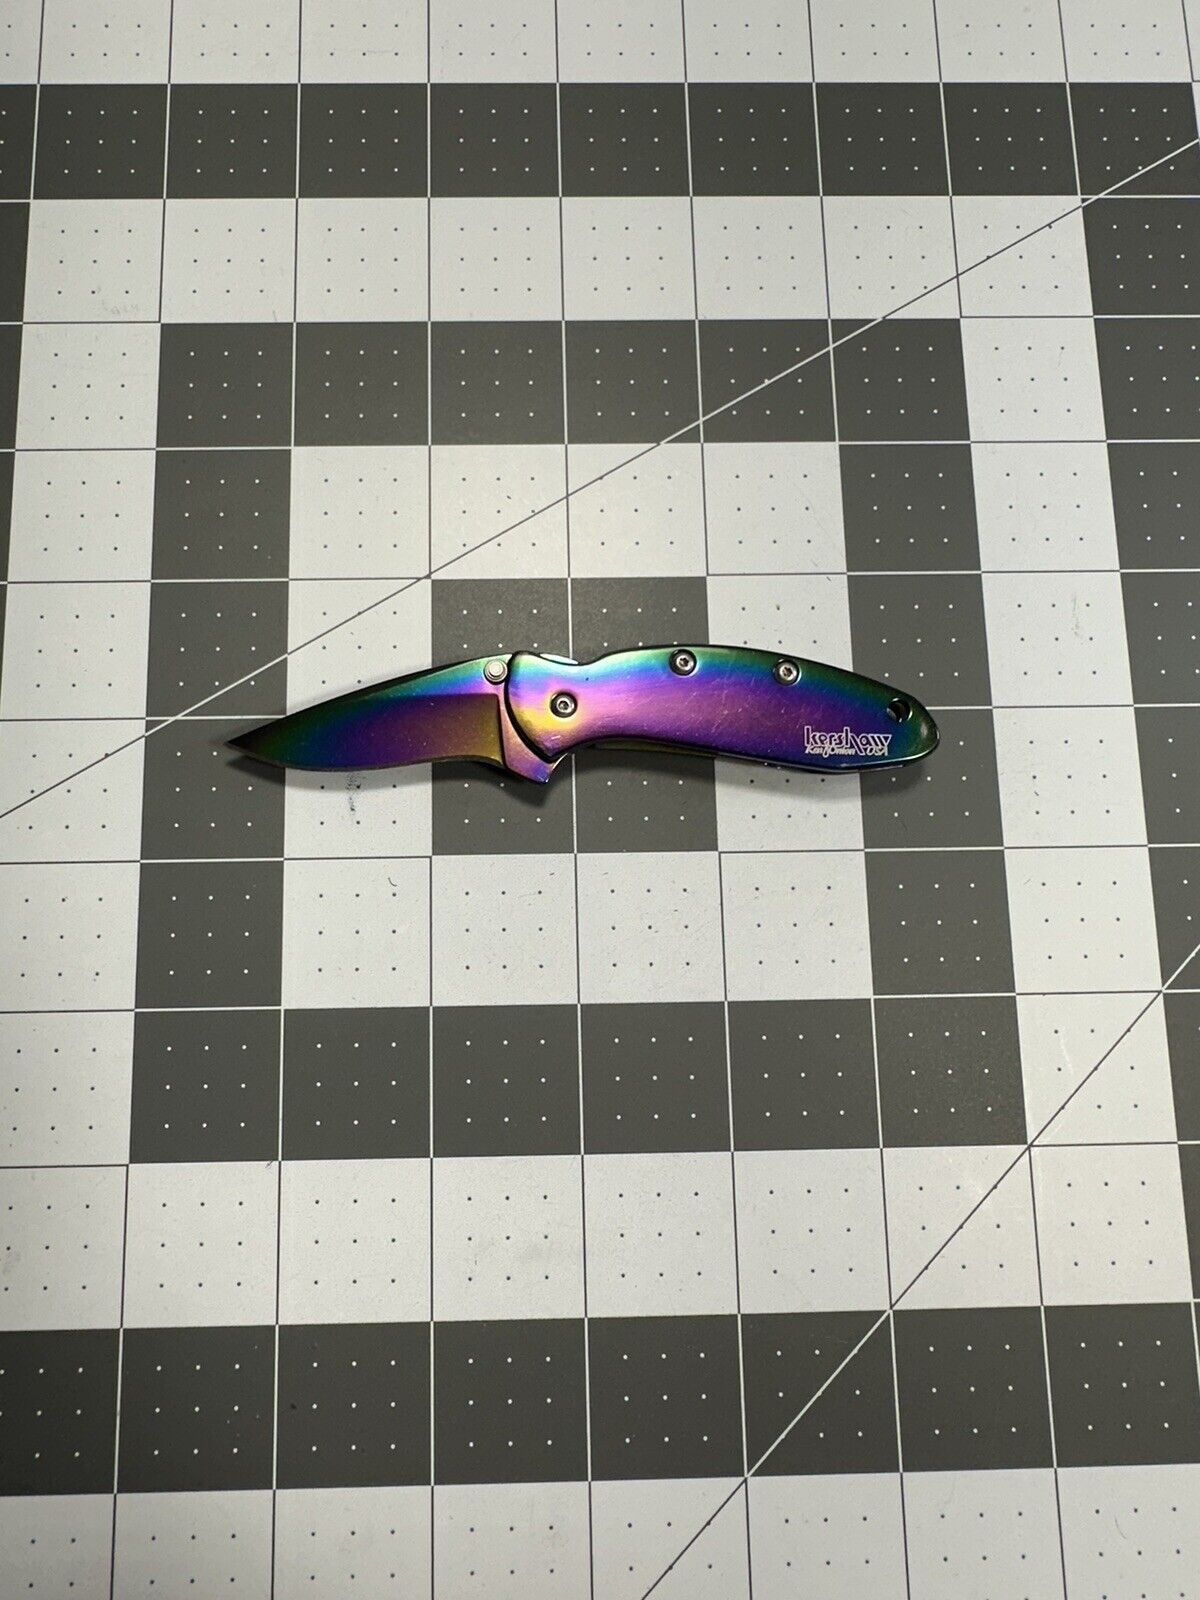 Kershaw 1600VIB Chive Rainbow Assisted Knife Multicolor June 2003 - 6497